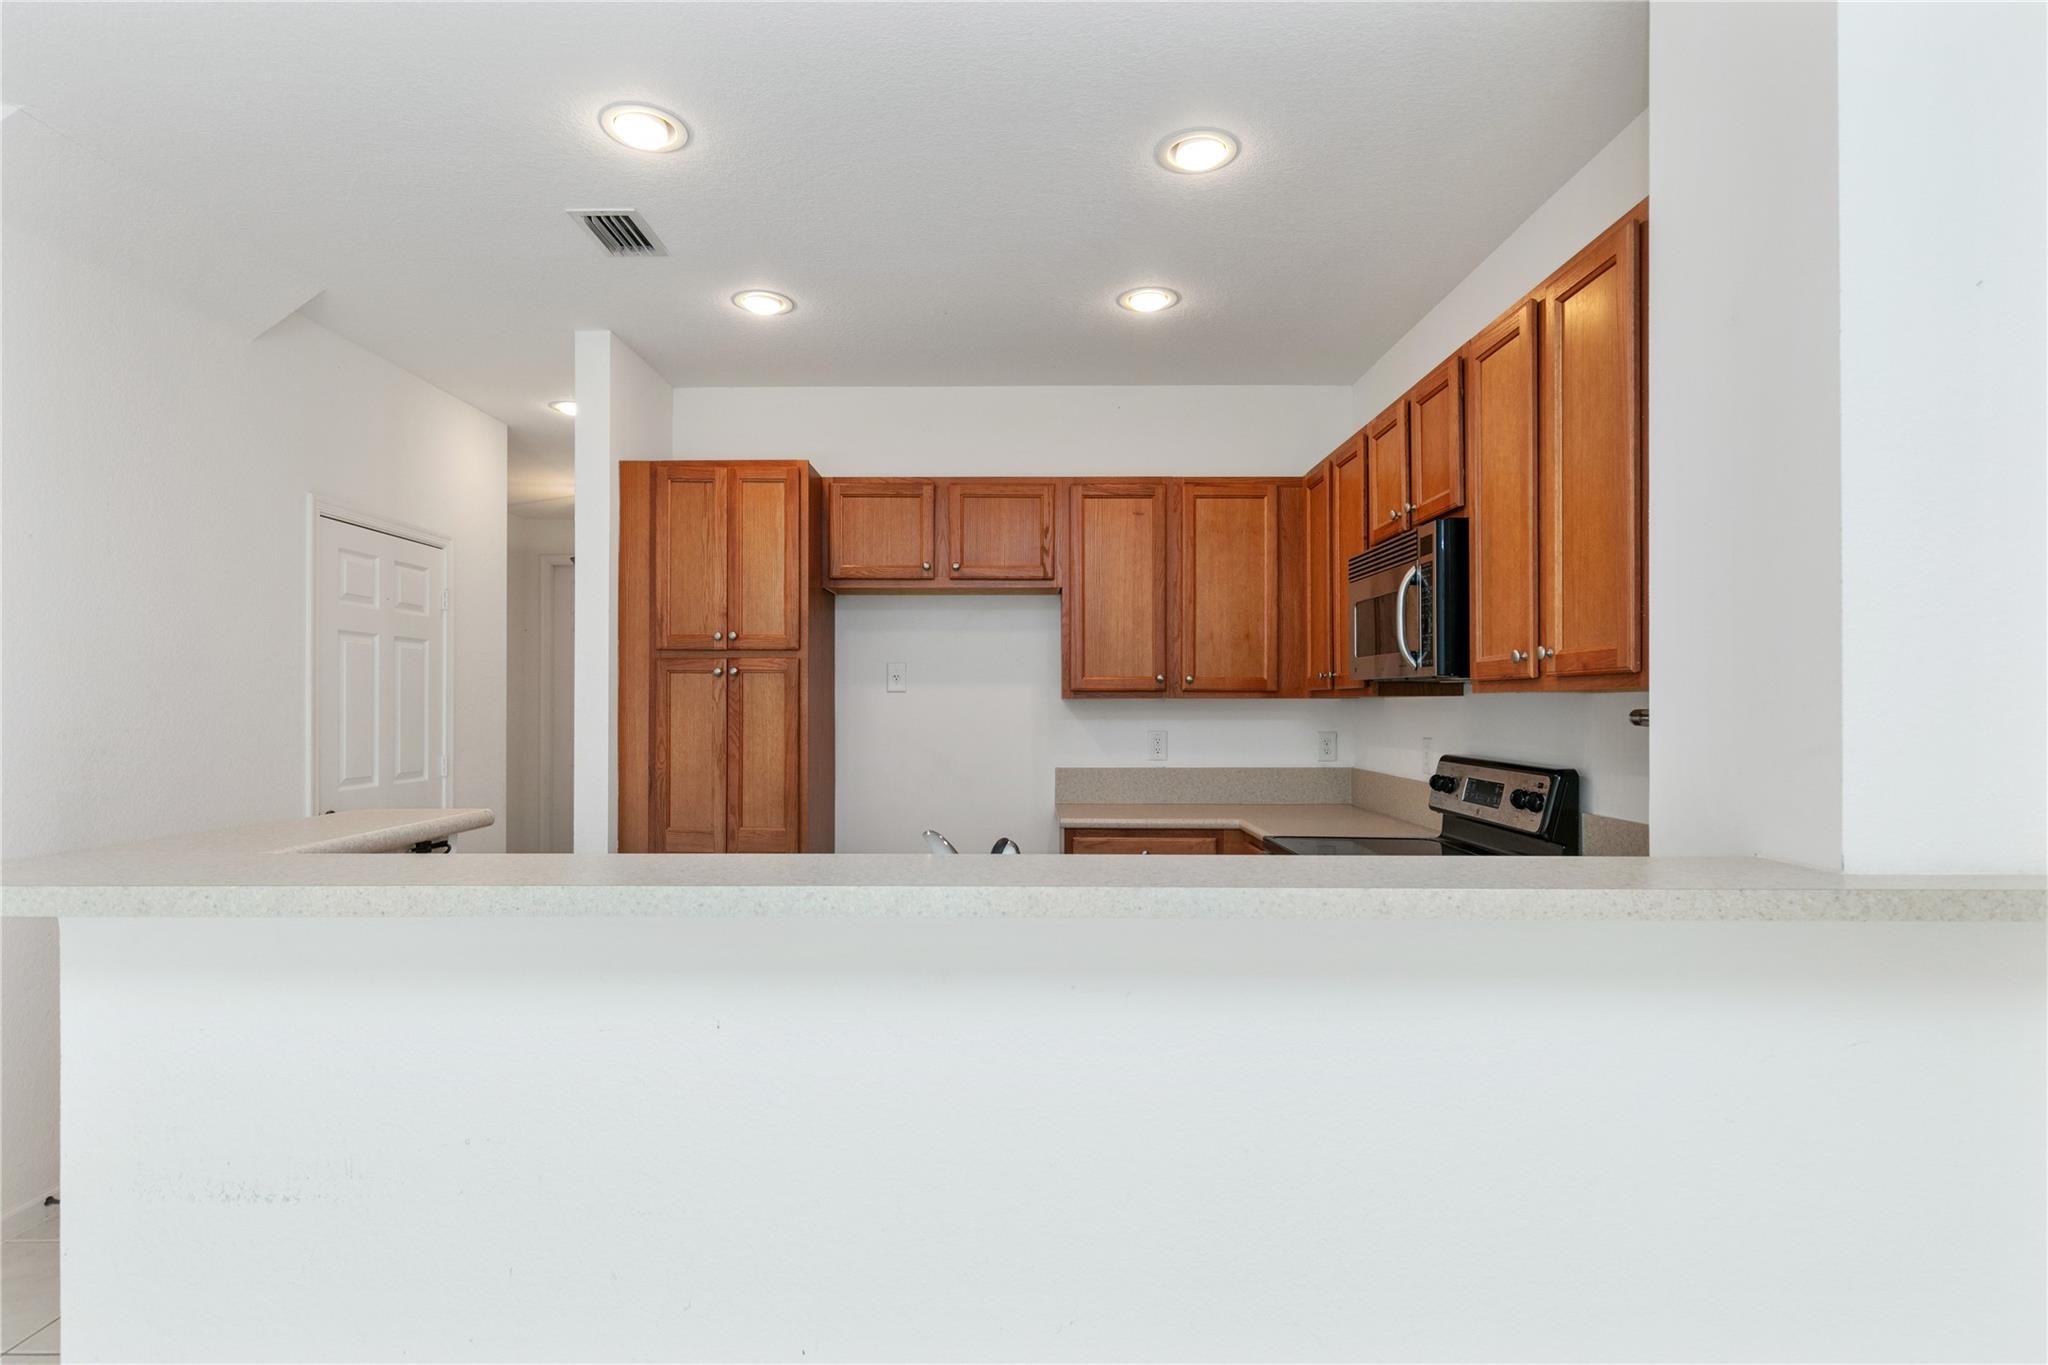 Photo 10 of 41 of 8776 Cypress Walk Ct townhome